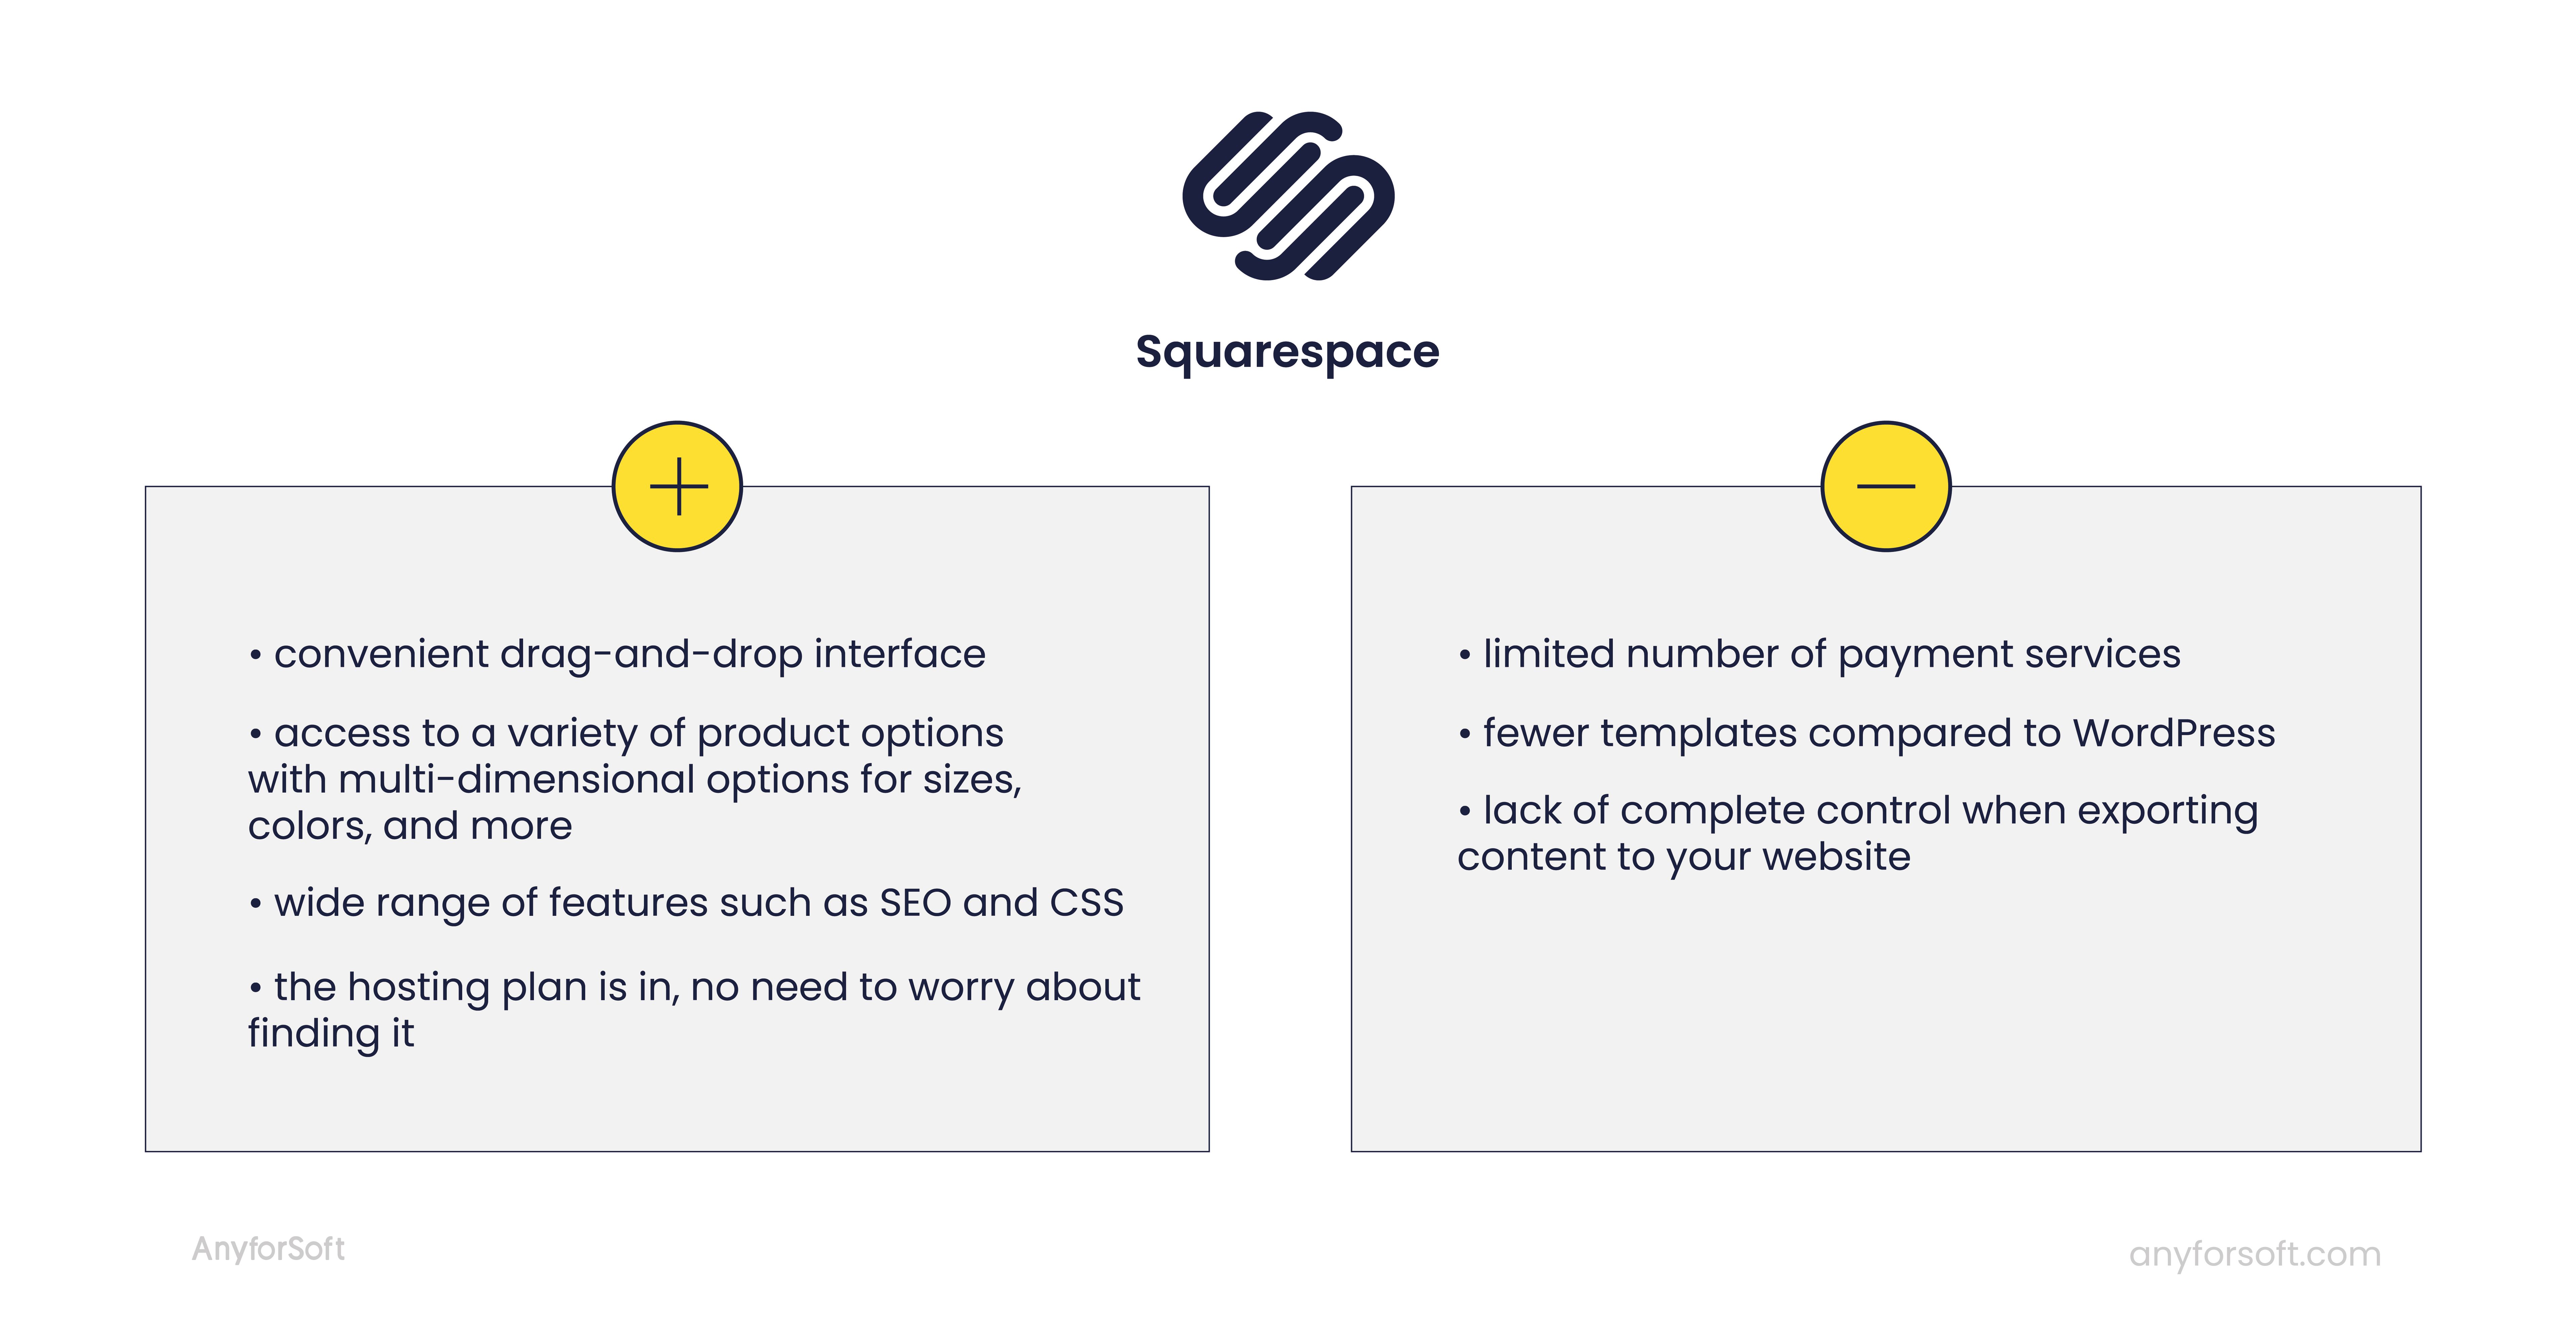 squarespace pros and cons